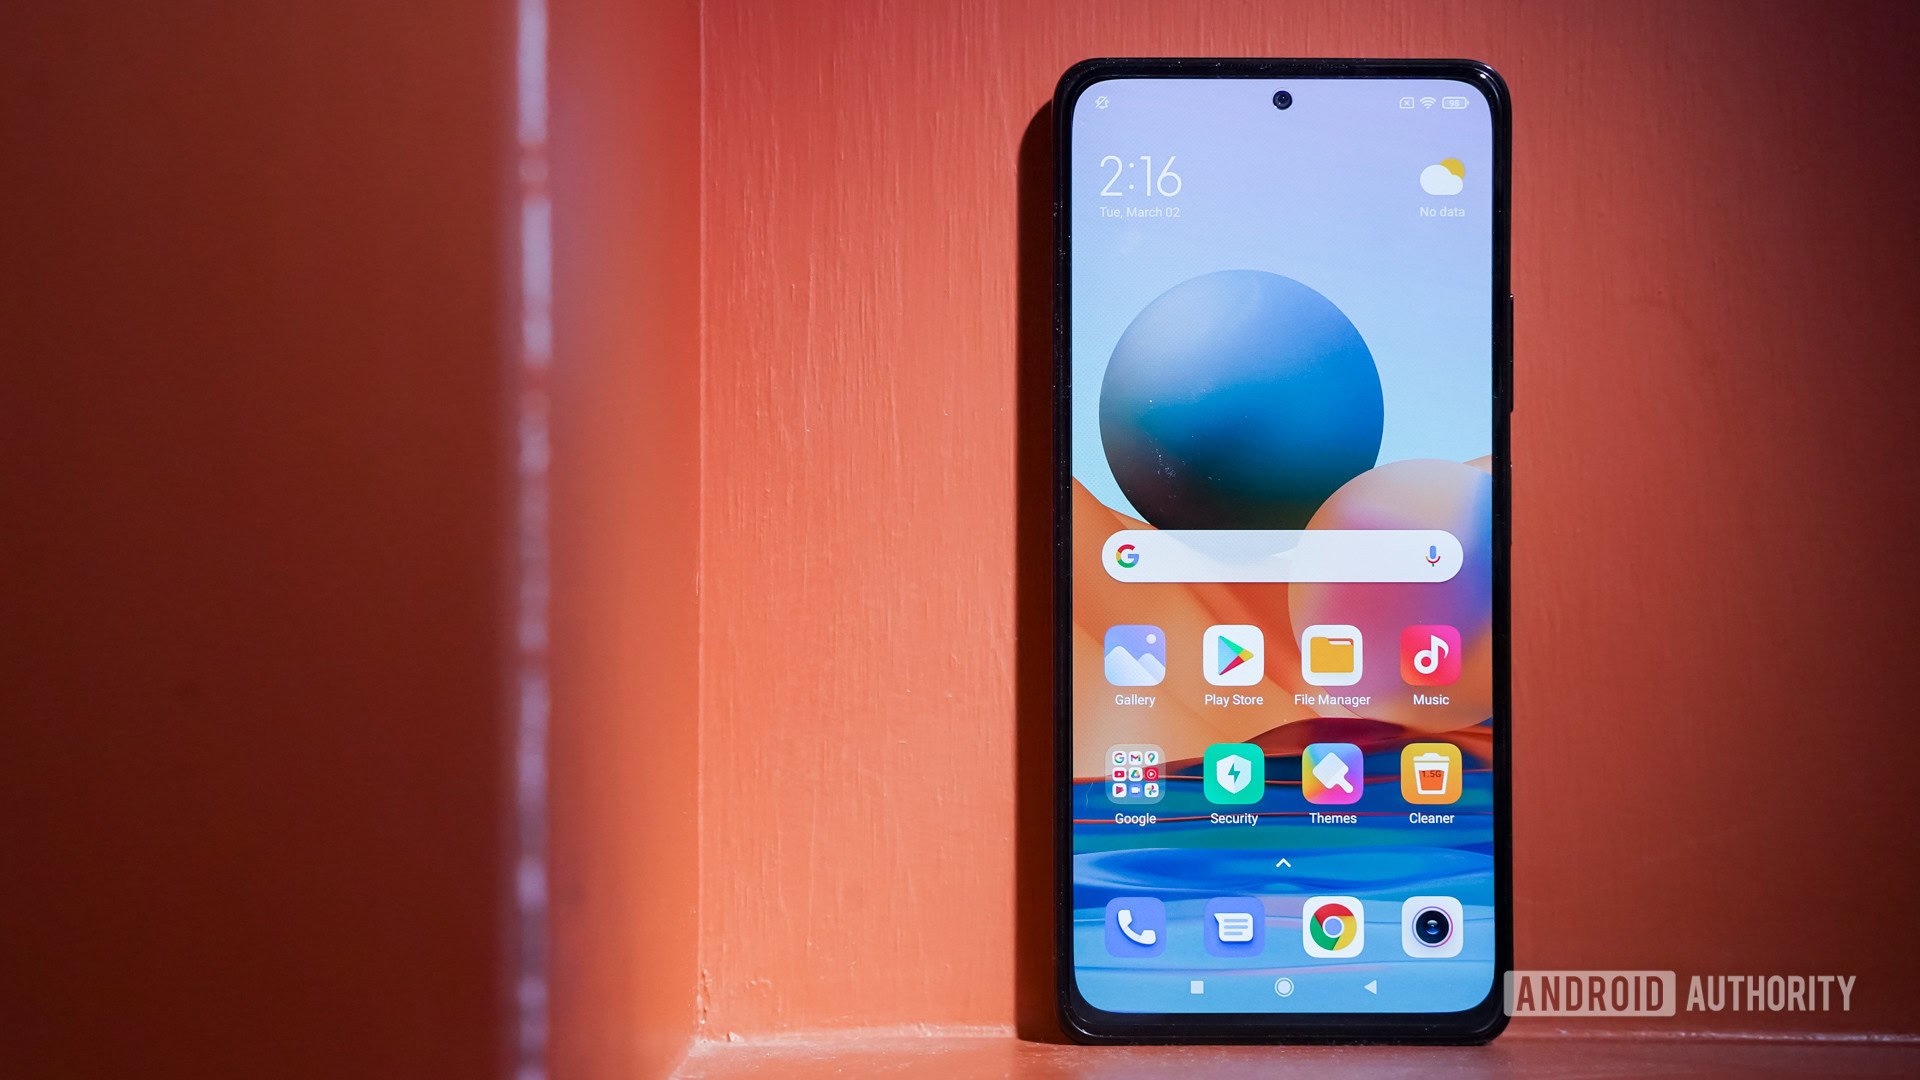 Redmi Note 10 Pro review: Low price belies solid specs